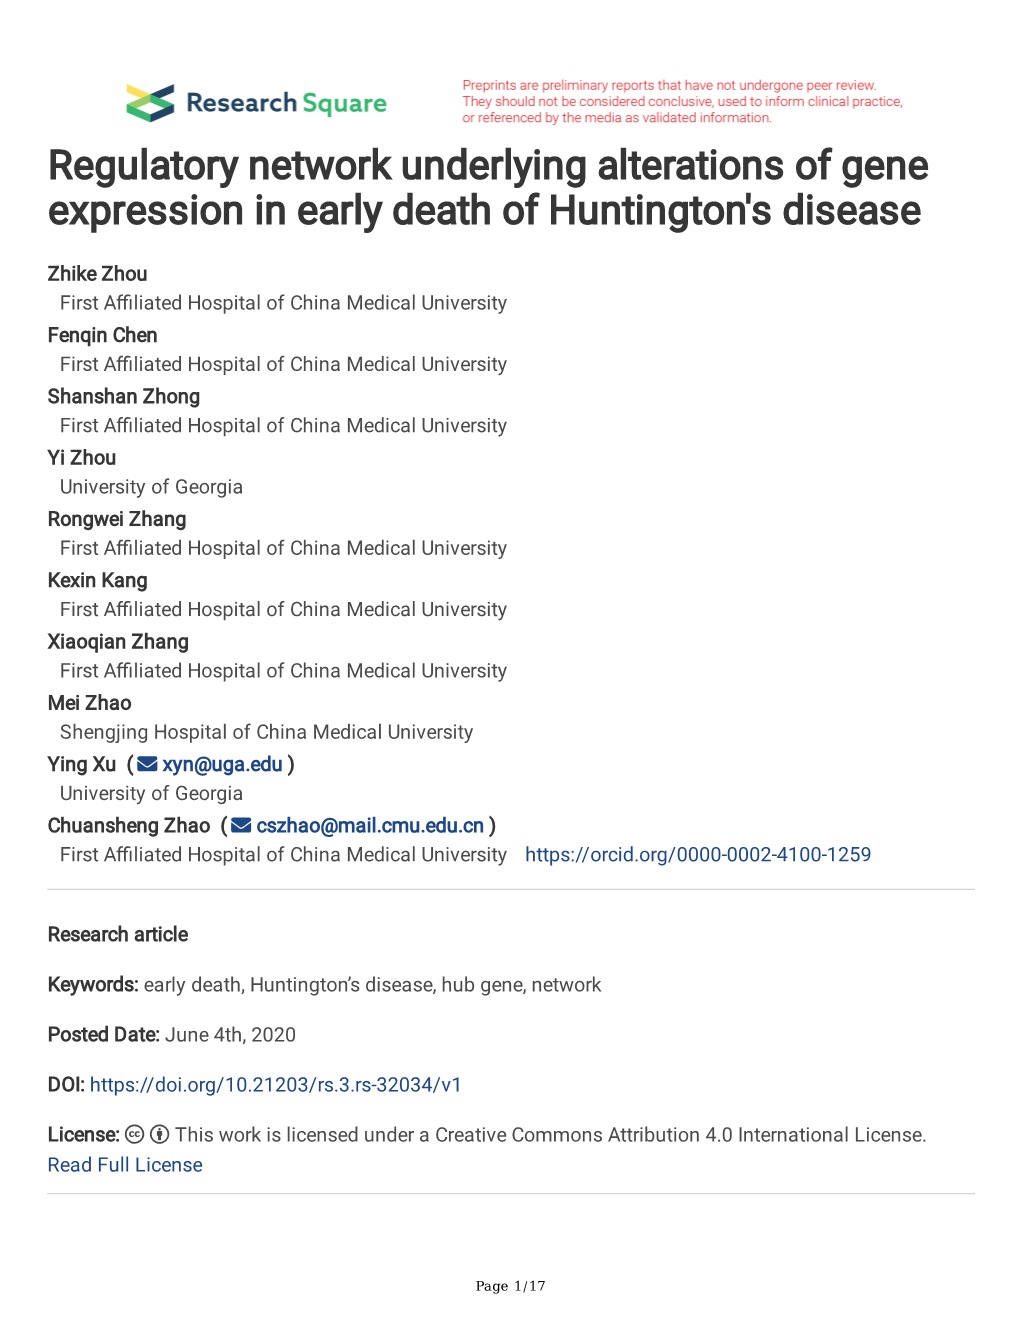 Regulatory Network Underlying Alterations of Gene Expression in Early Death of Huntington's Disease